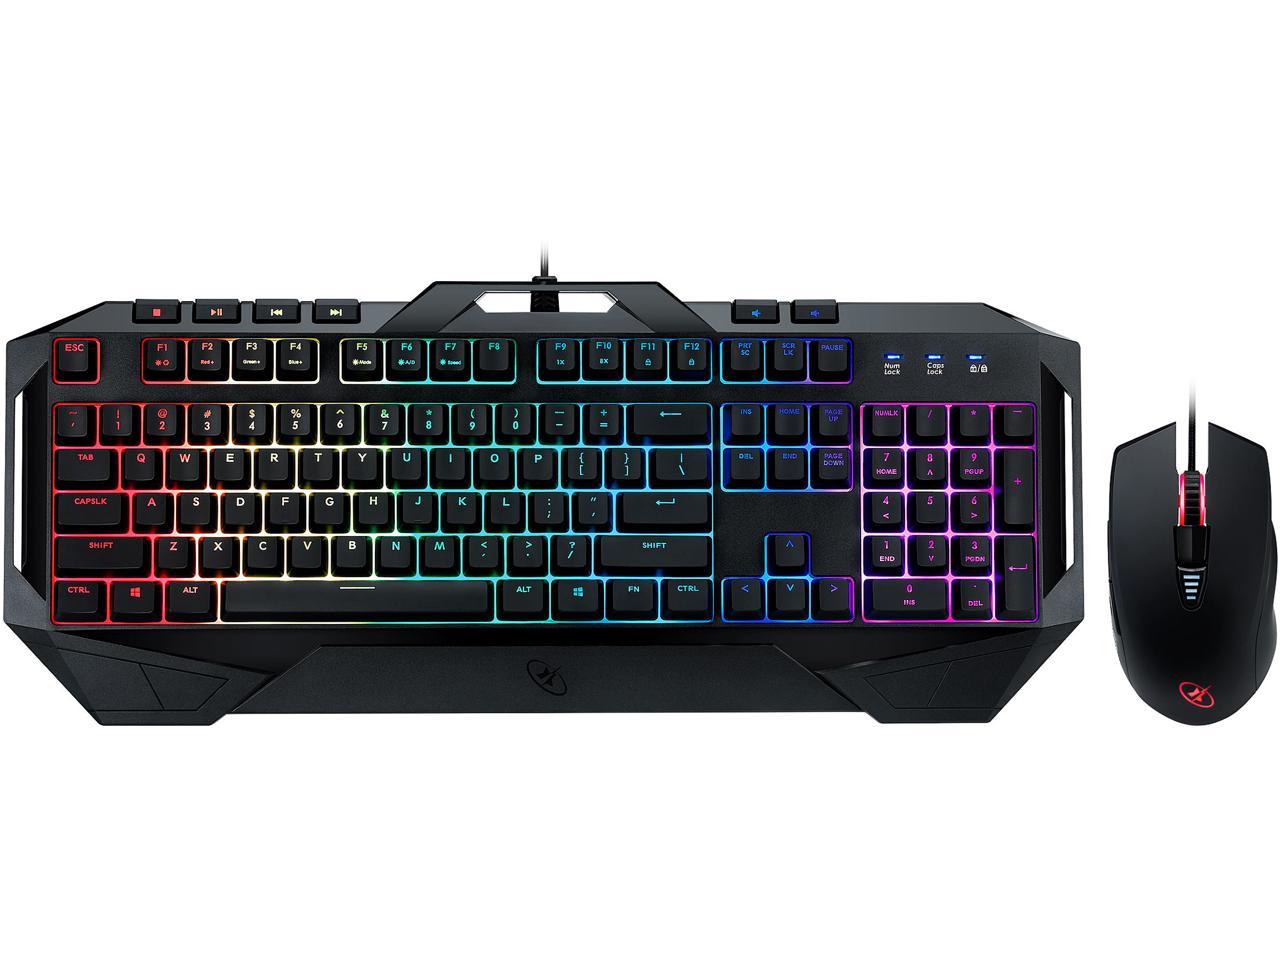 Rosewill FUSION C40 Gaming Keyboard and Mouse Combo $20 + Free Shipping